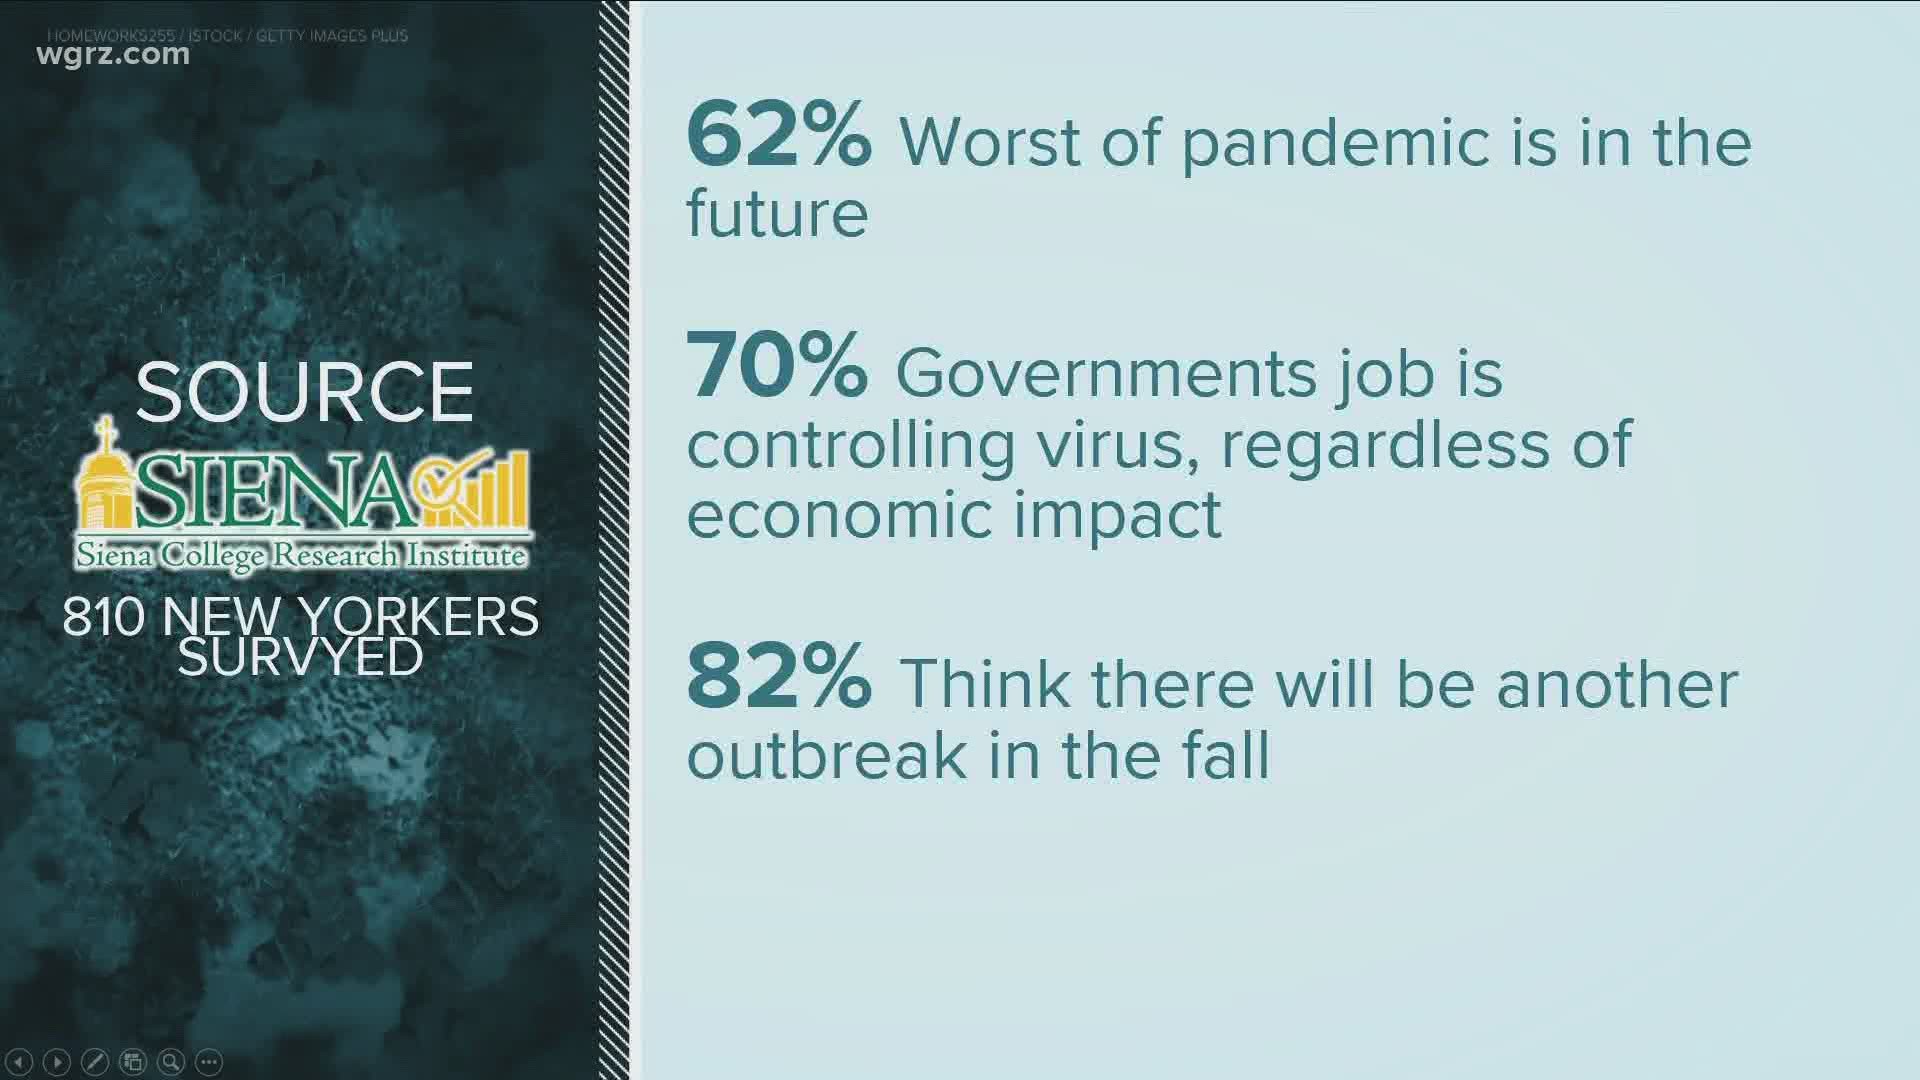 82-PERCENT OF THE PEOPLE POLLED THINK THERE WILL BE ANOTHER OUTBREAK OF THE CORONAVIRUS IN THE FALL.